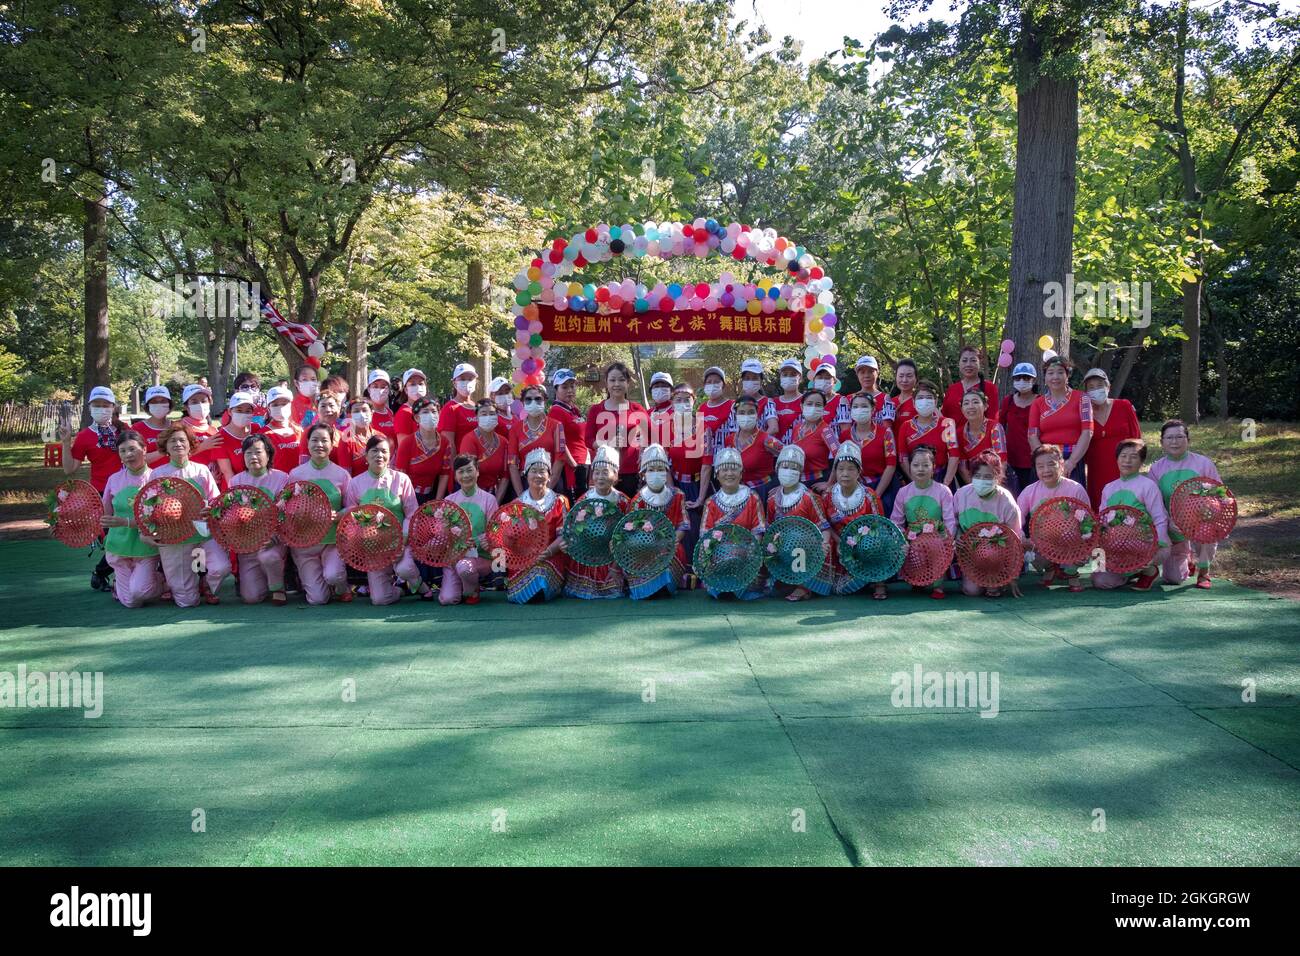 A group photo of the members of Kai Xin Yizhu dance troupe prior to a performance celebrating their 6th anniversary. In Queens, New York. Stock Photo